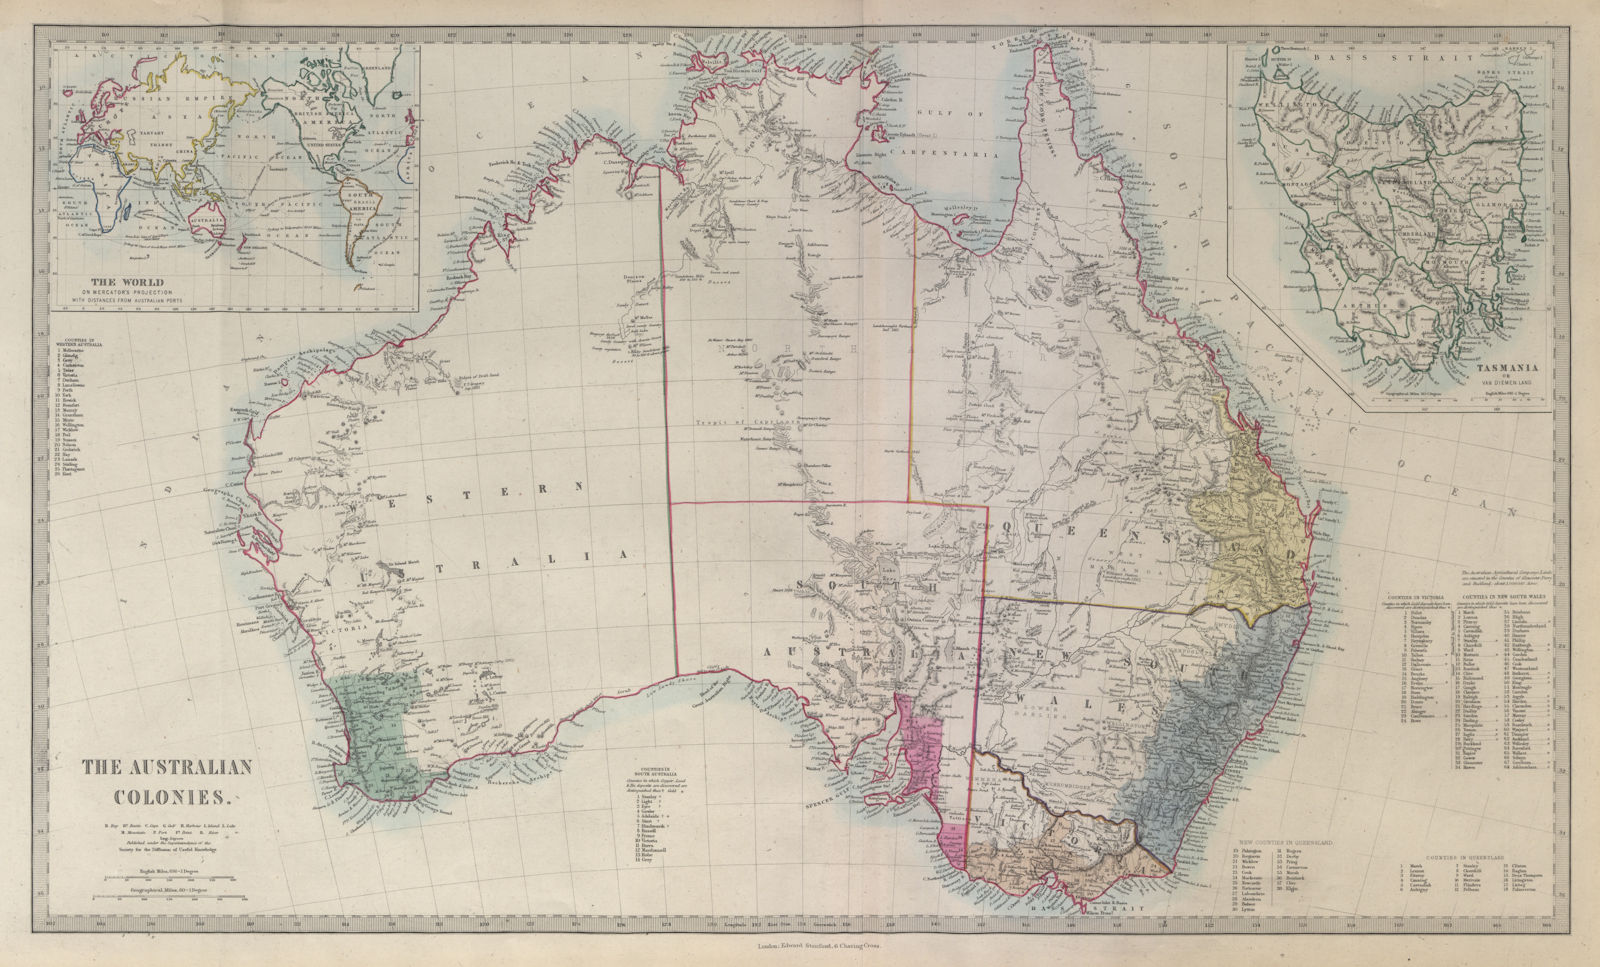 THE AUSTRALIAN COLONIES showing counties. Double page. SDUK 1874 old map